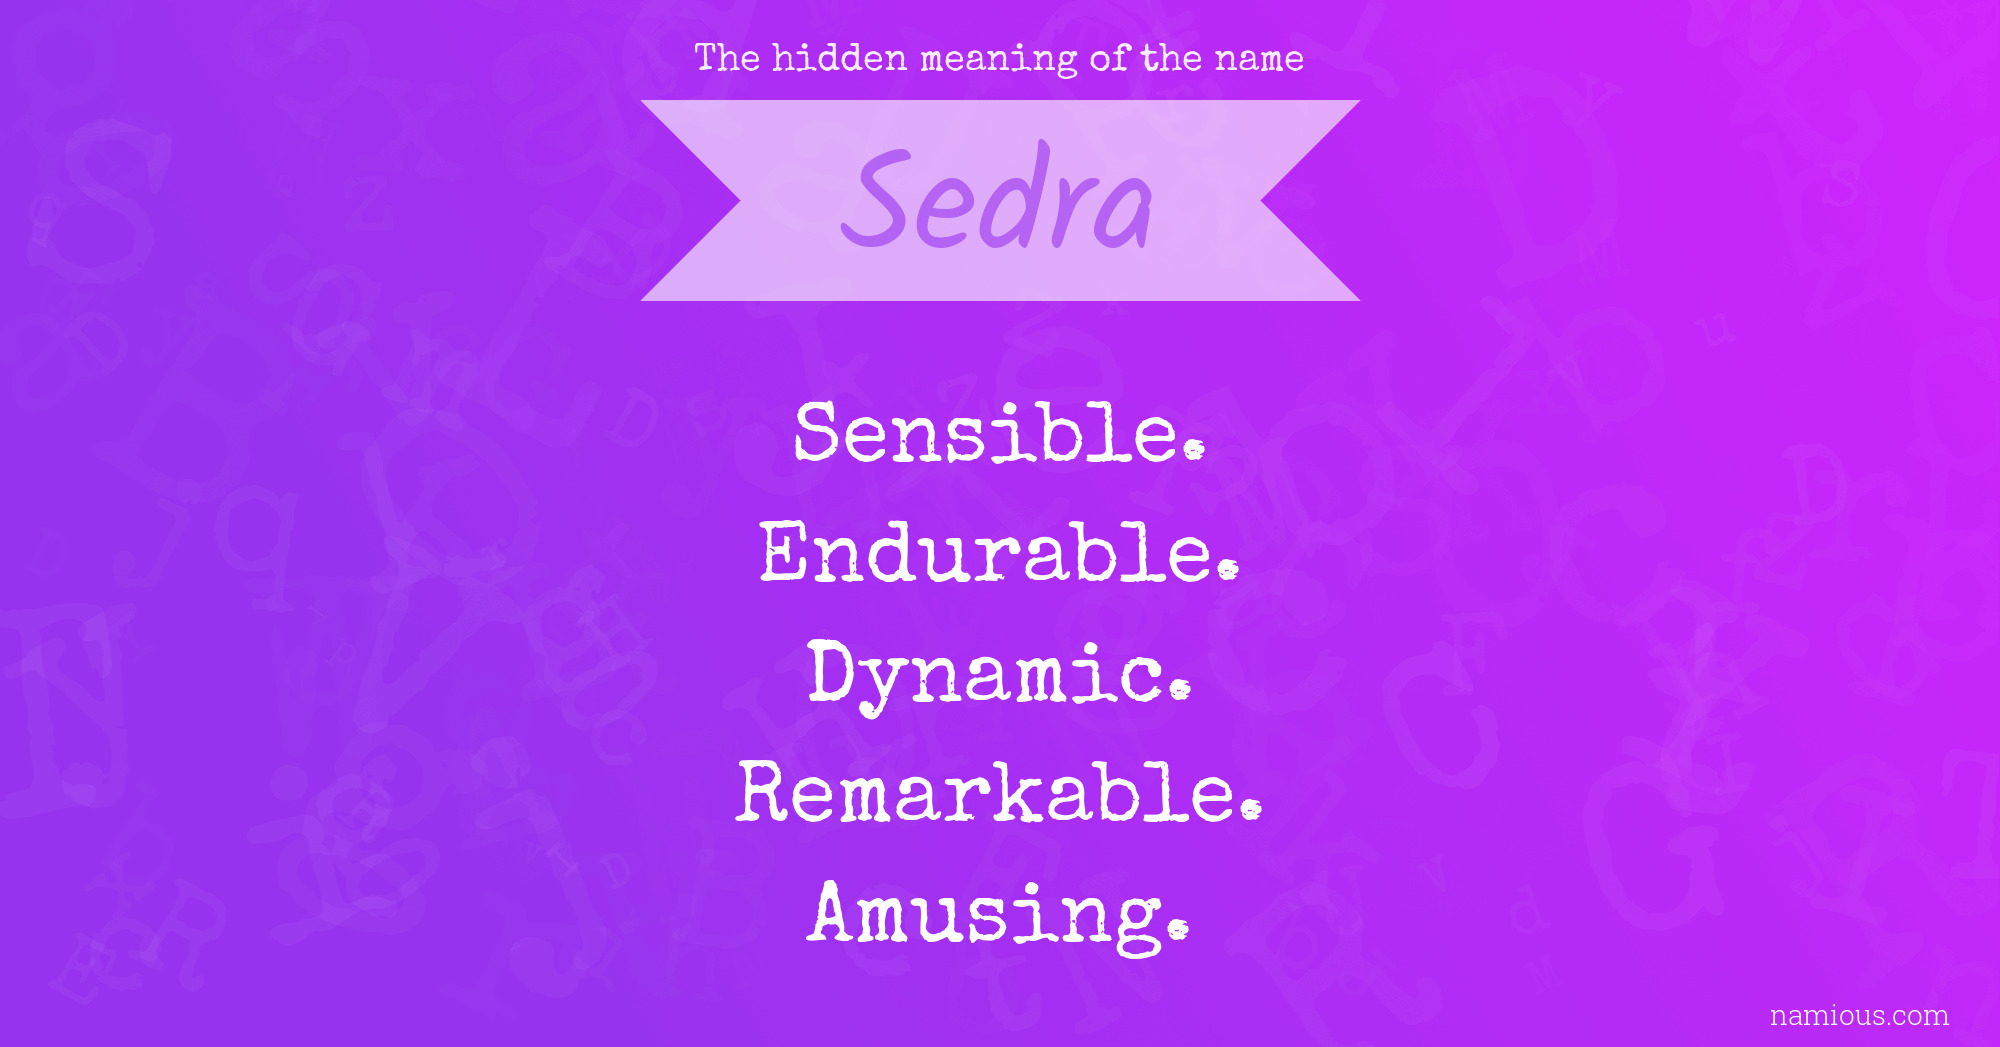 The hidden meaning of the name Sedra